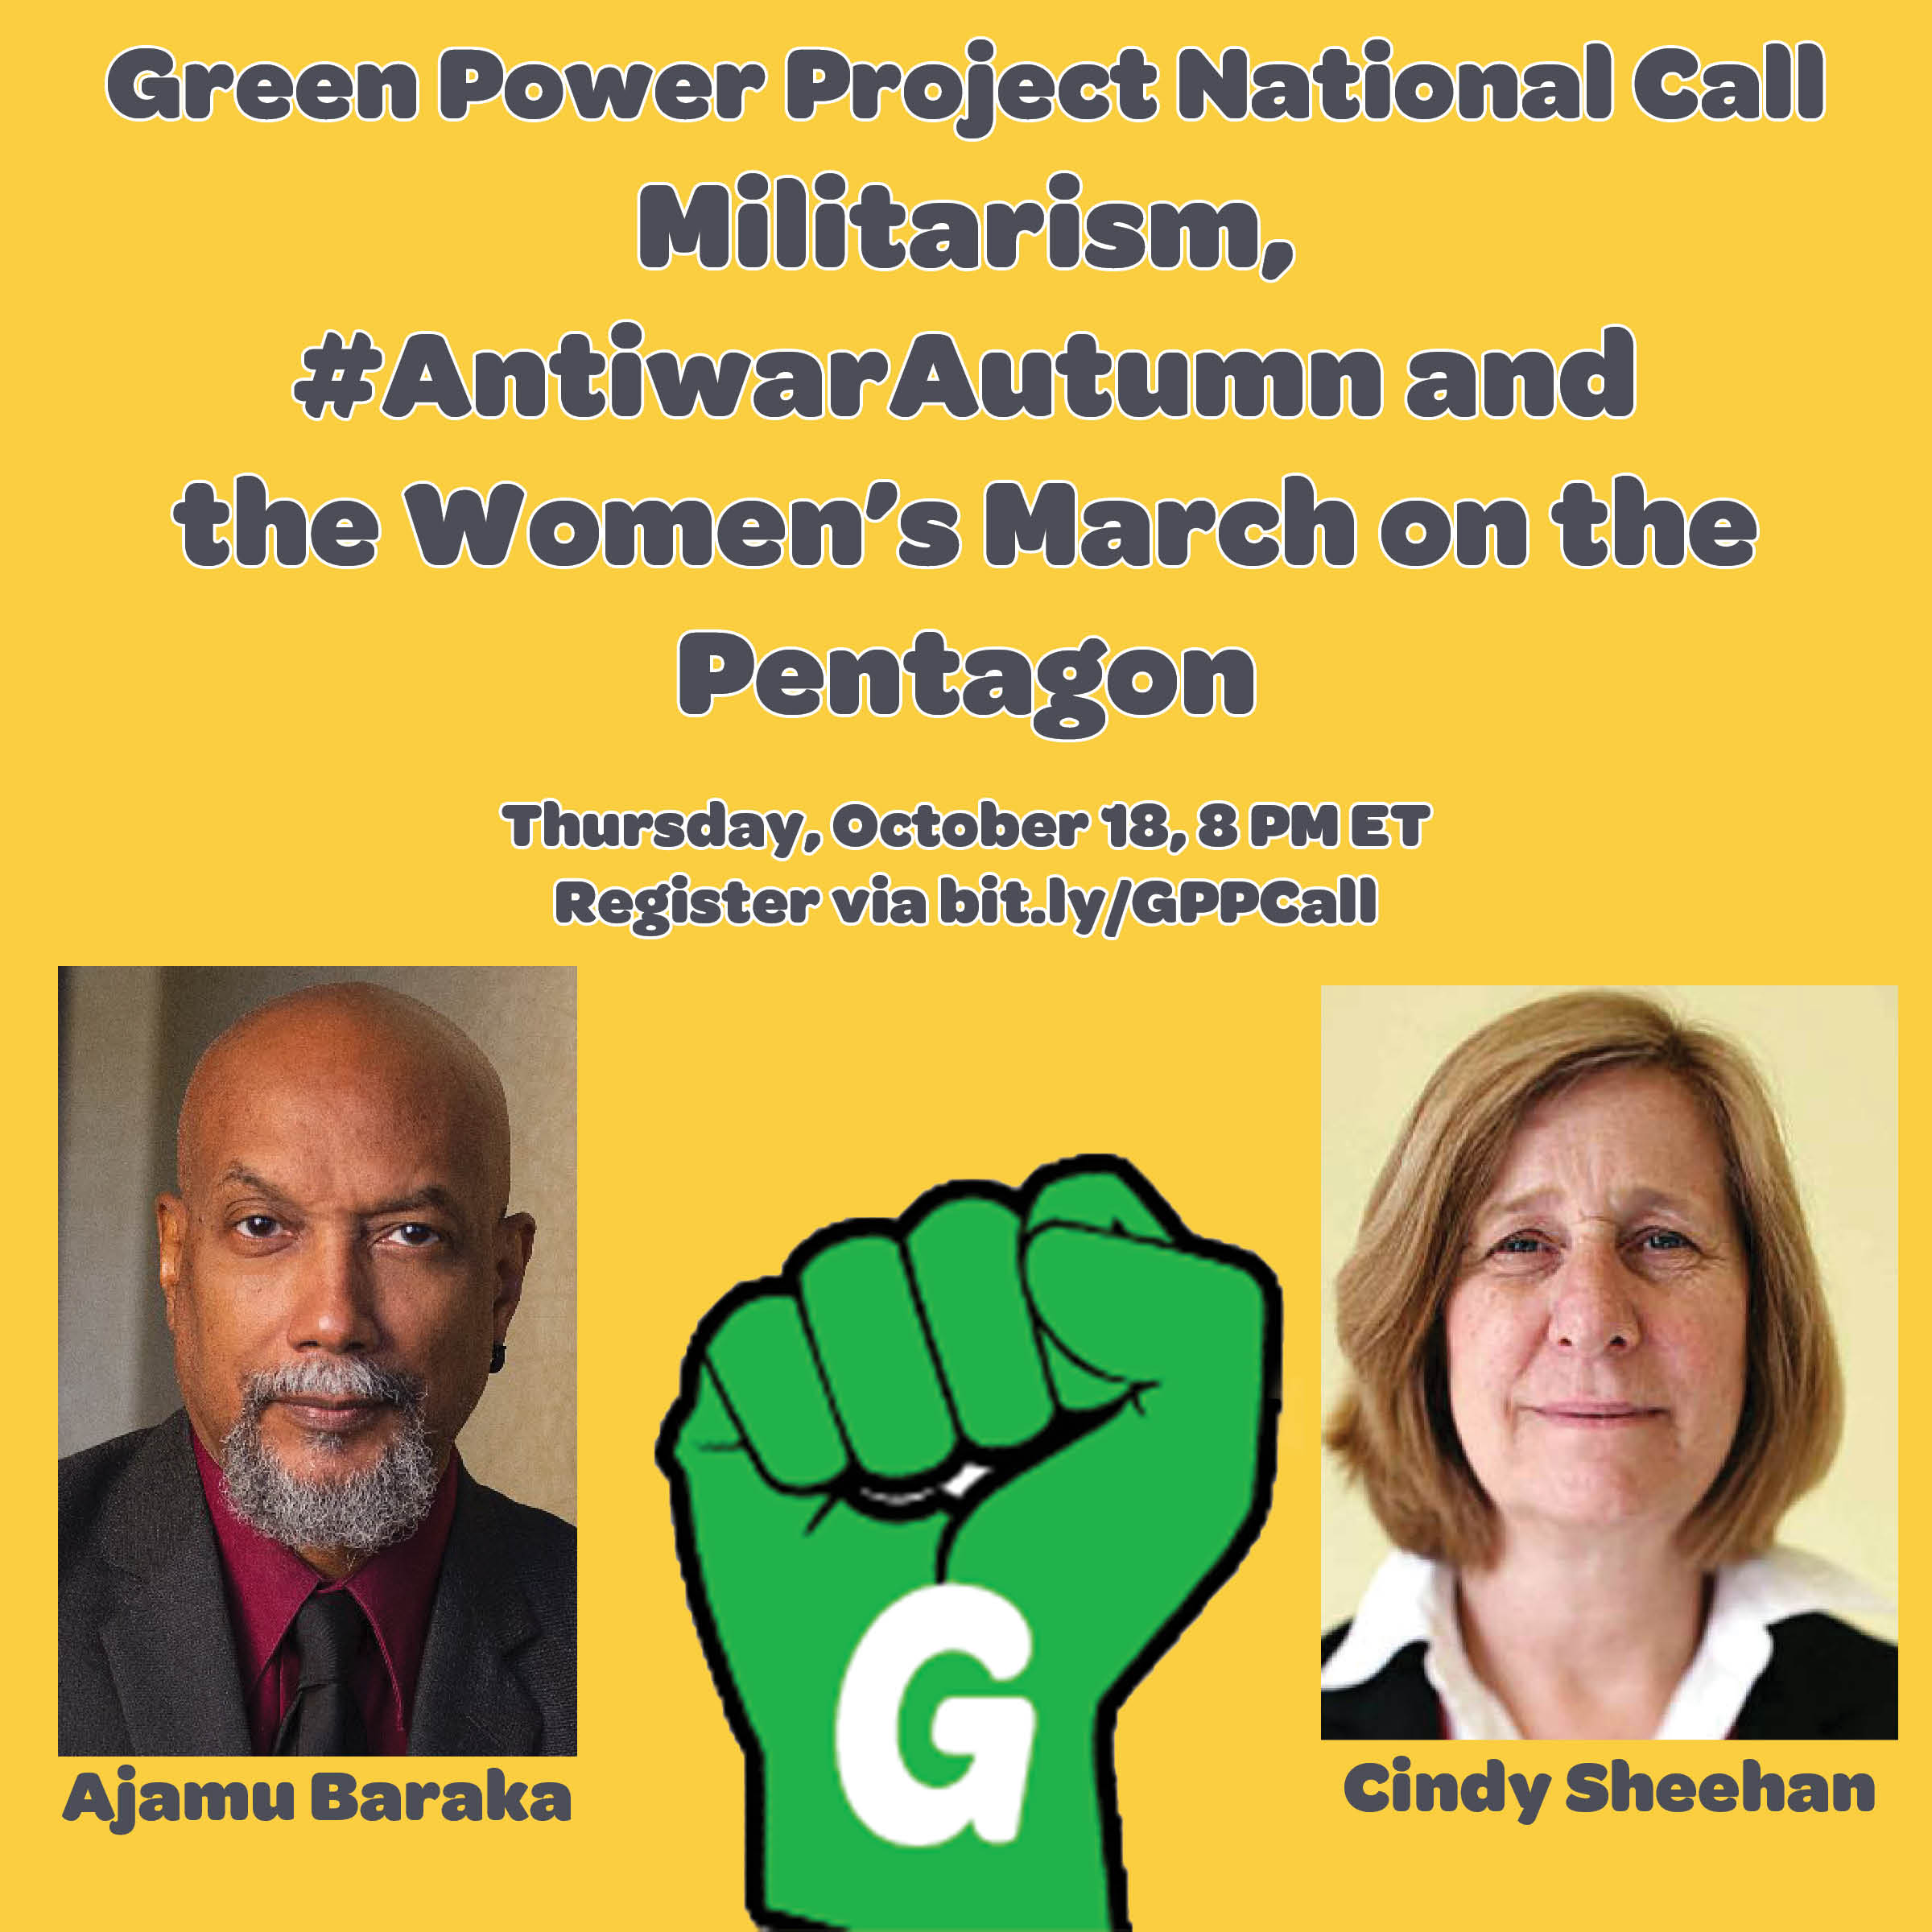 National Public Call: Ending the Wars at Home and Abroad with Cindy Sheehan and Ajamu Baraka